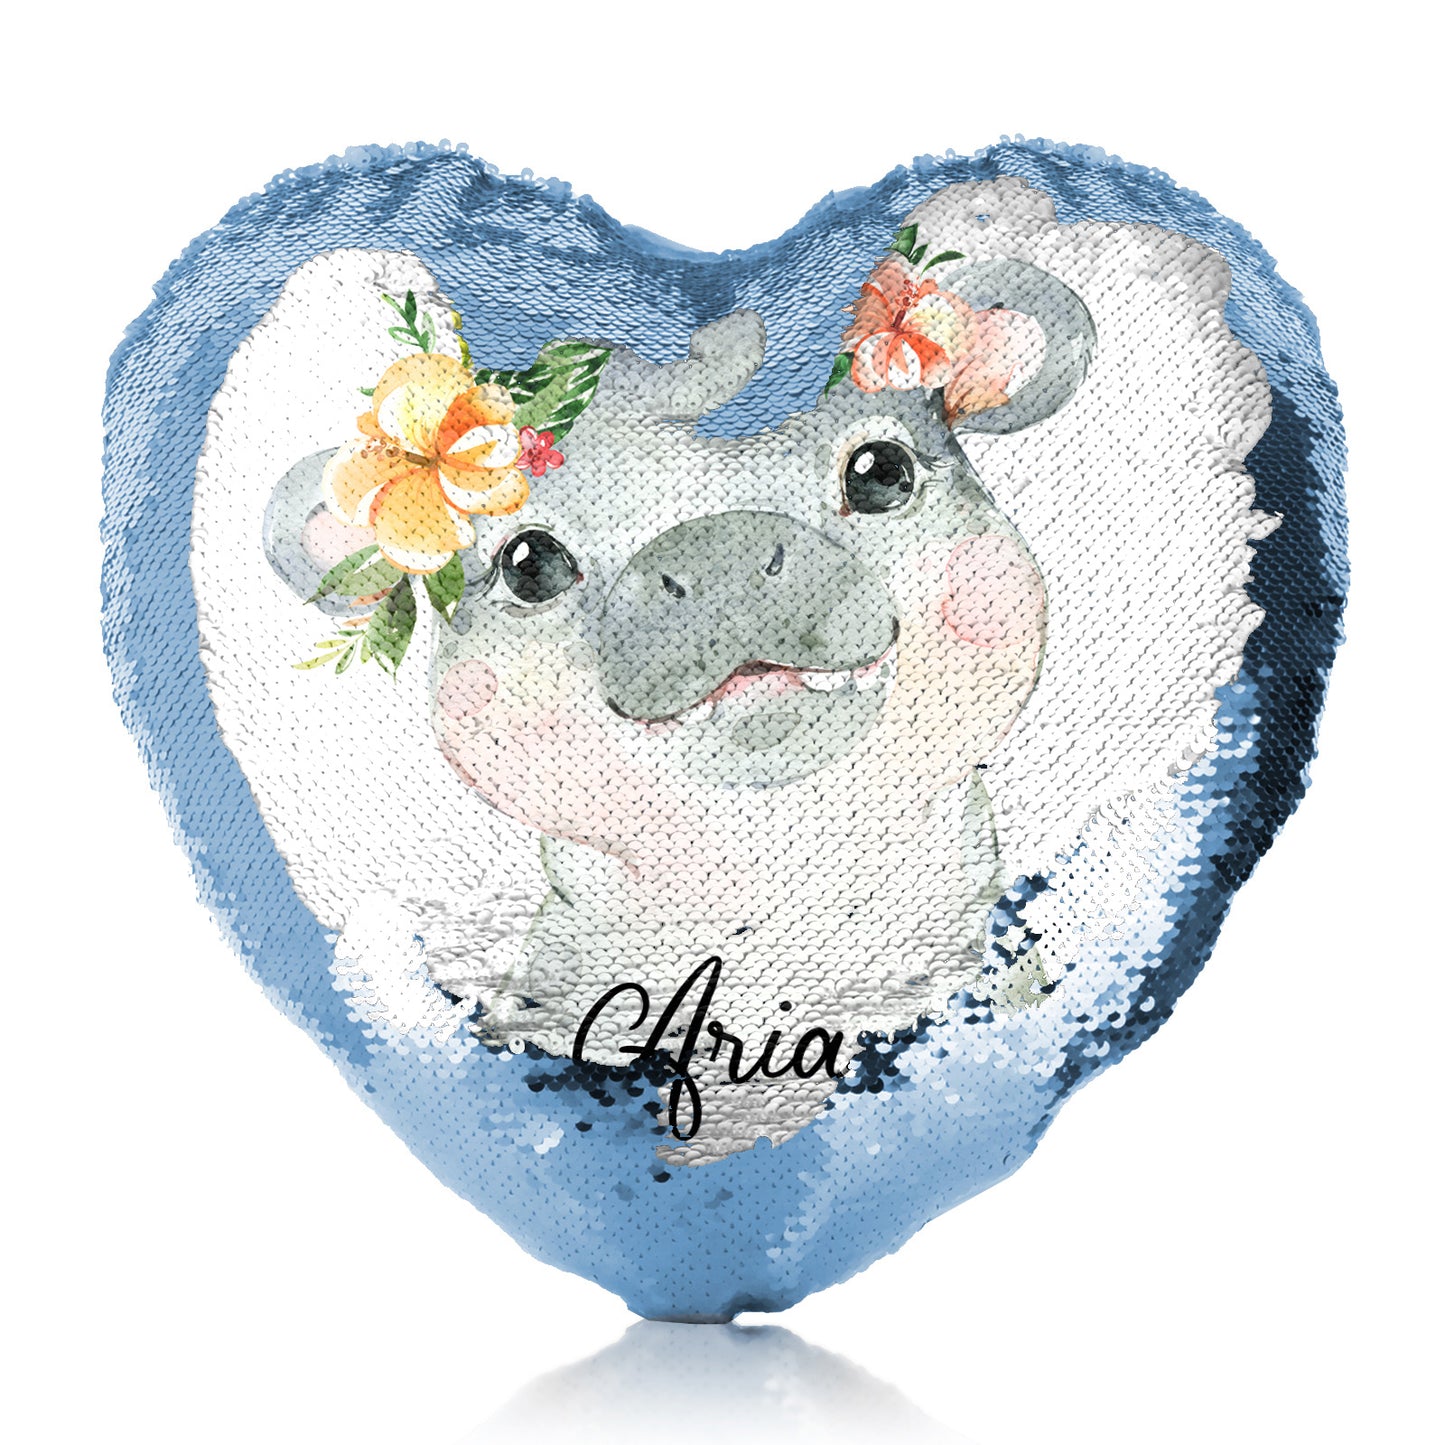 Personalised Sequin Heart Cushion with Hippo Peach Flowers and Cute Text